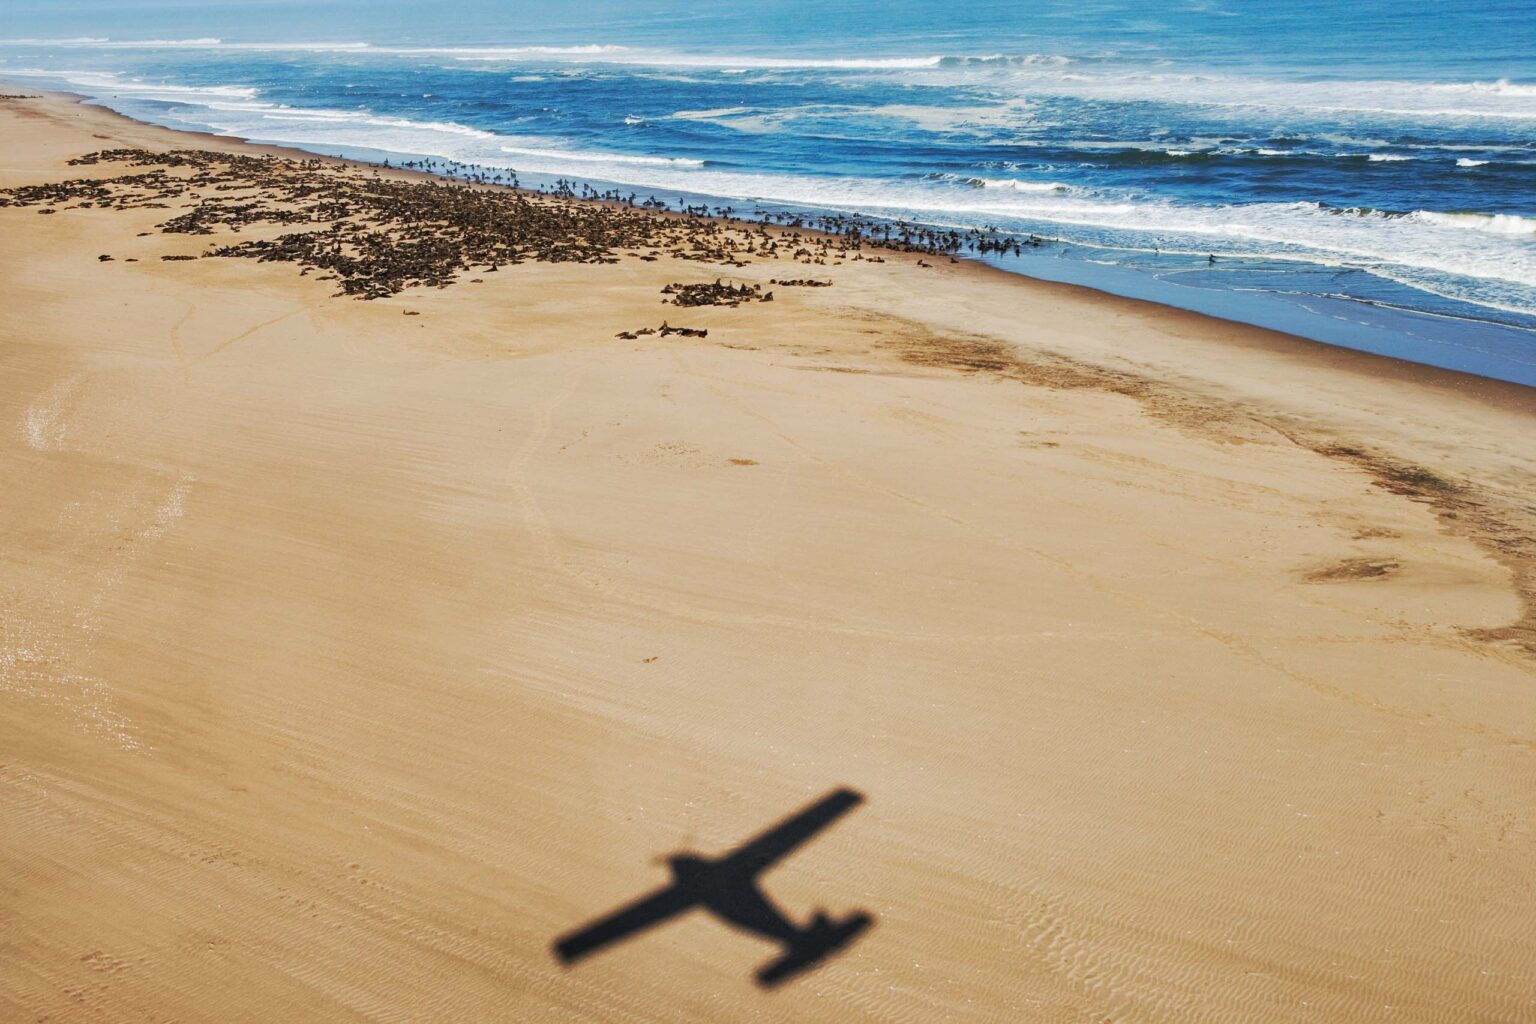 A shadow of a plane flying over a beach in Namibia.